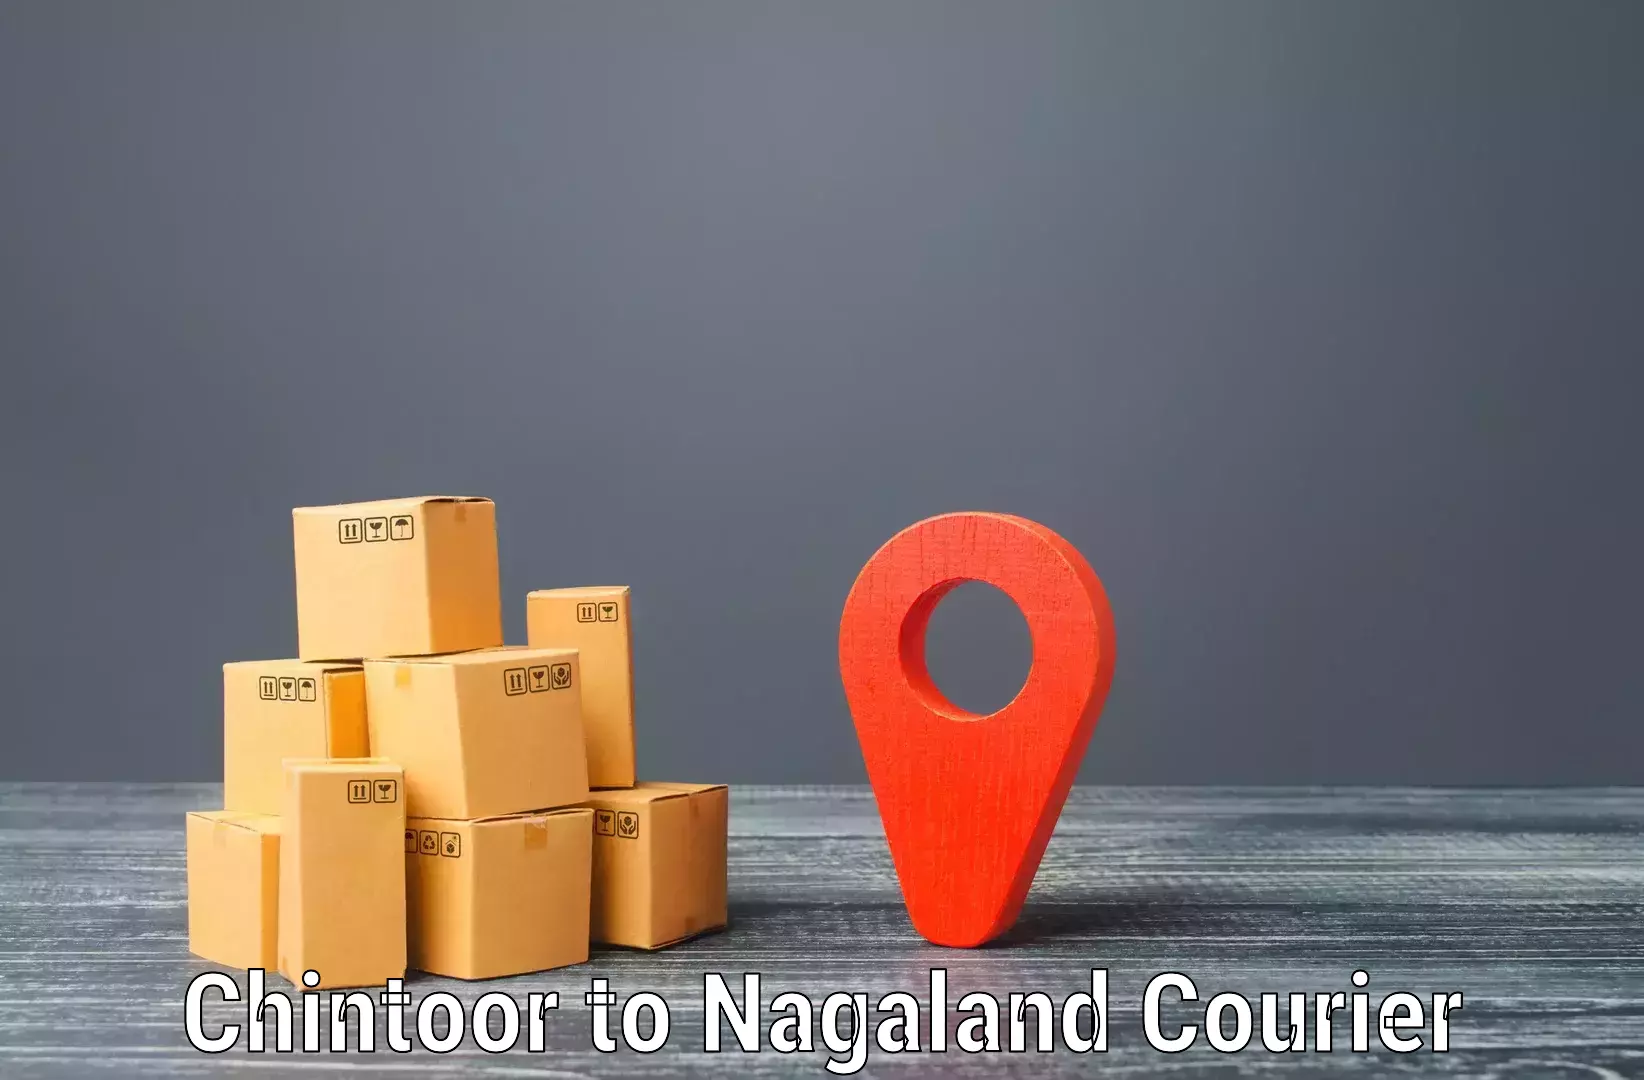 Express mail service Chintoor to Nagaland